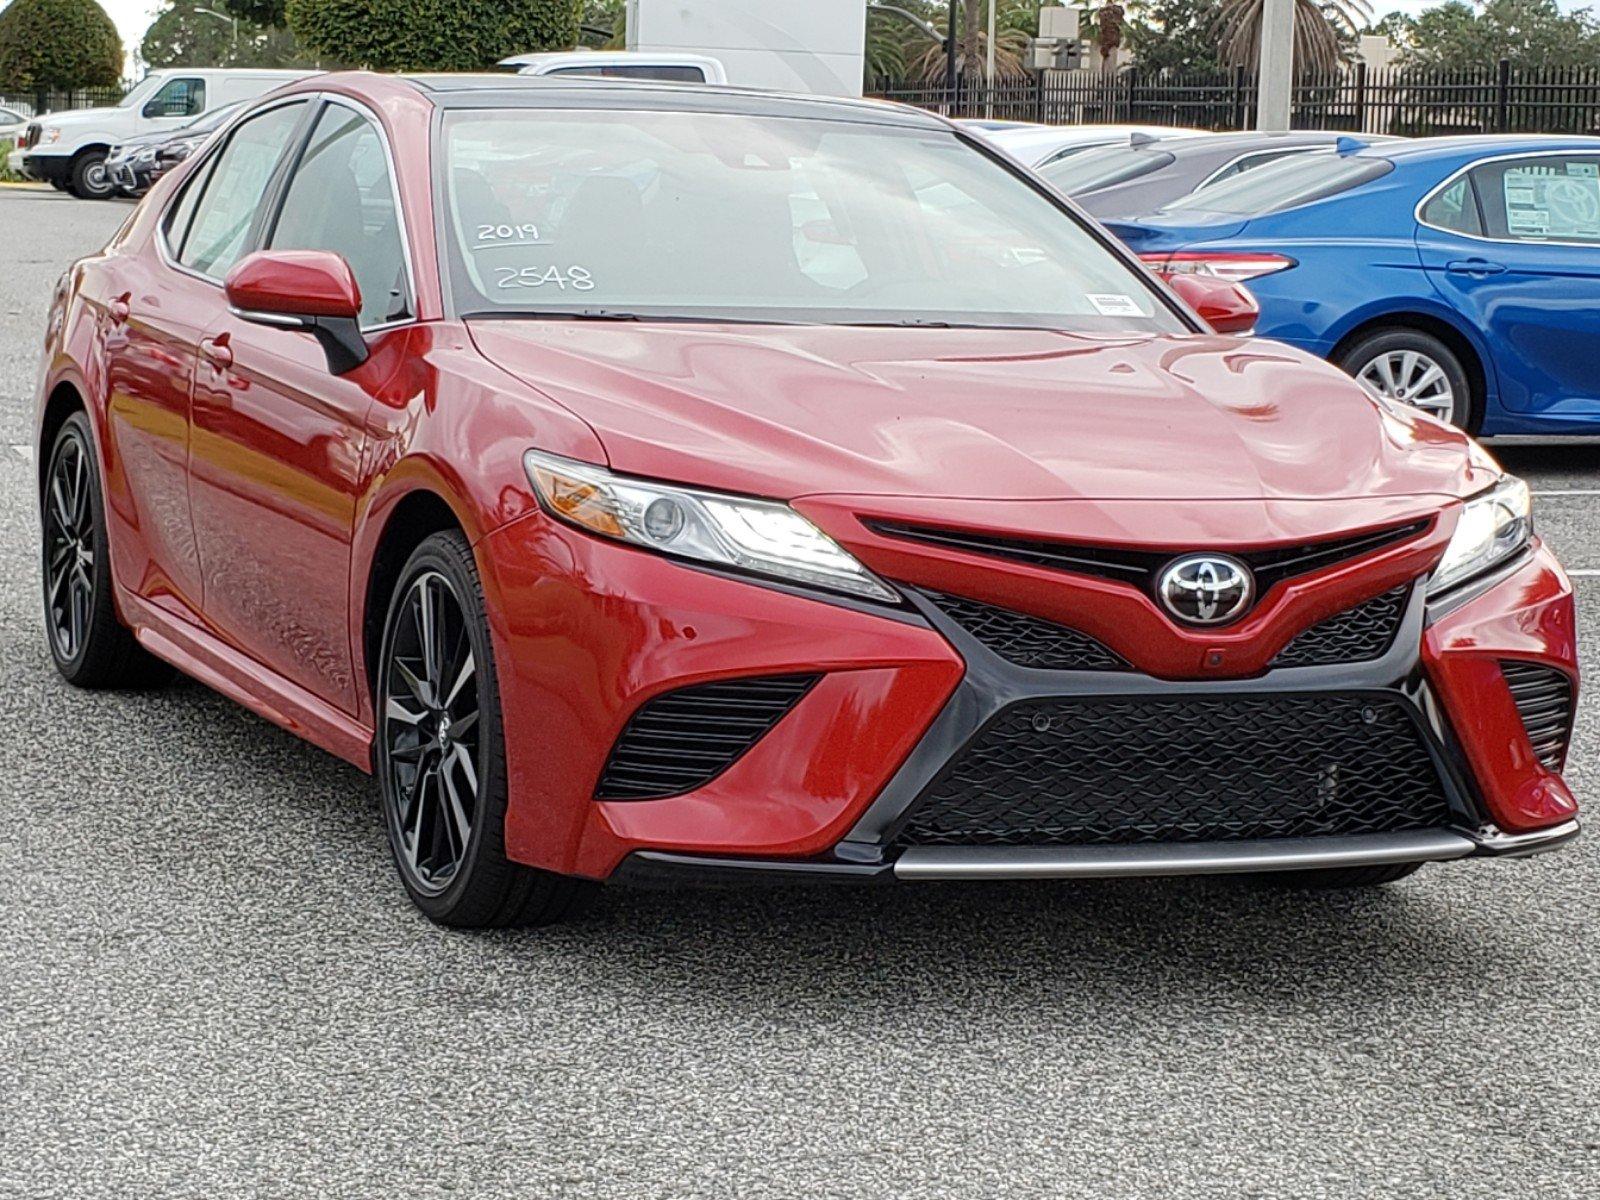 New 2019 Toyota Camry XSE 4dr Car in Orlando